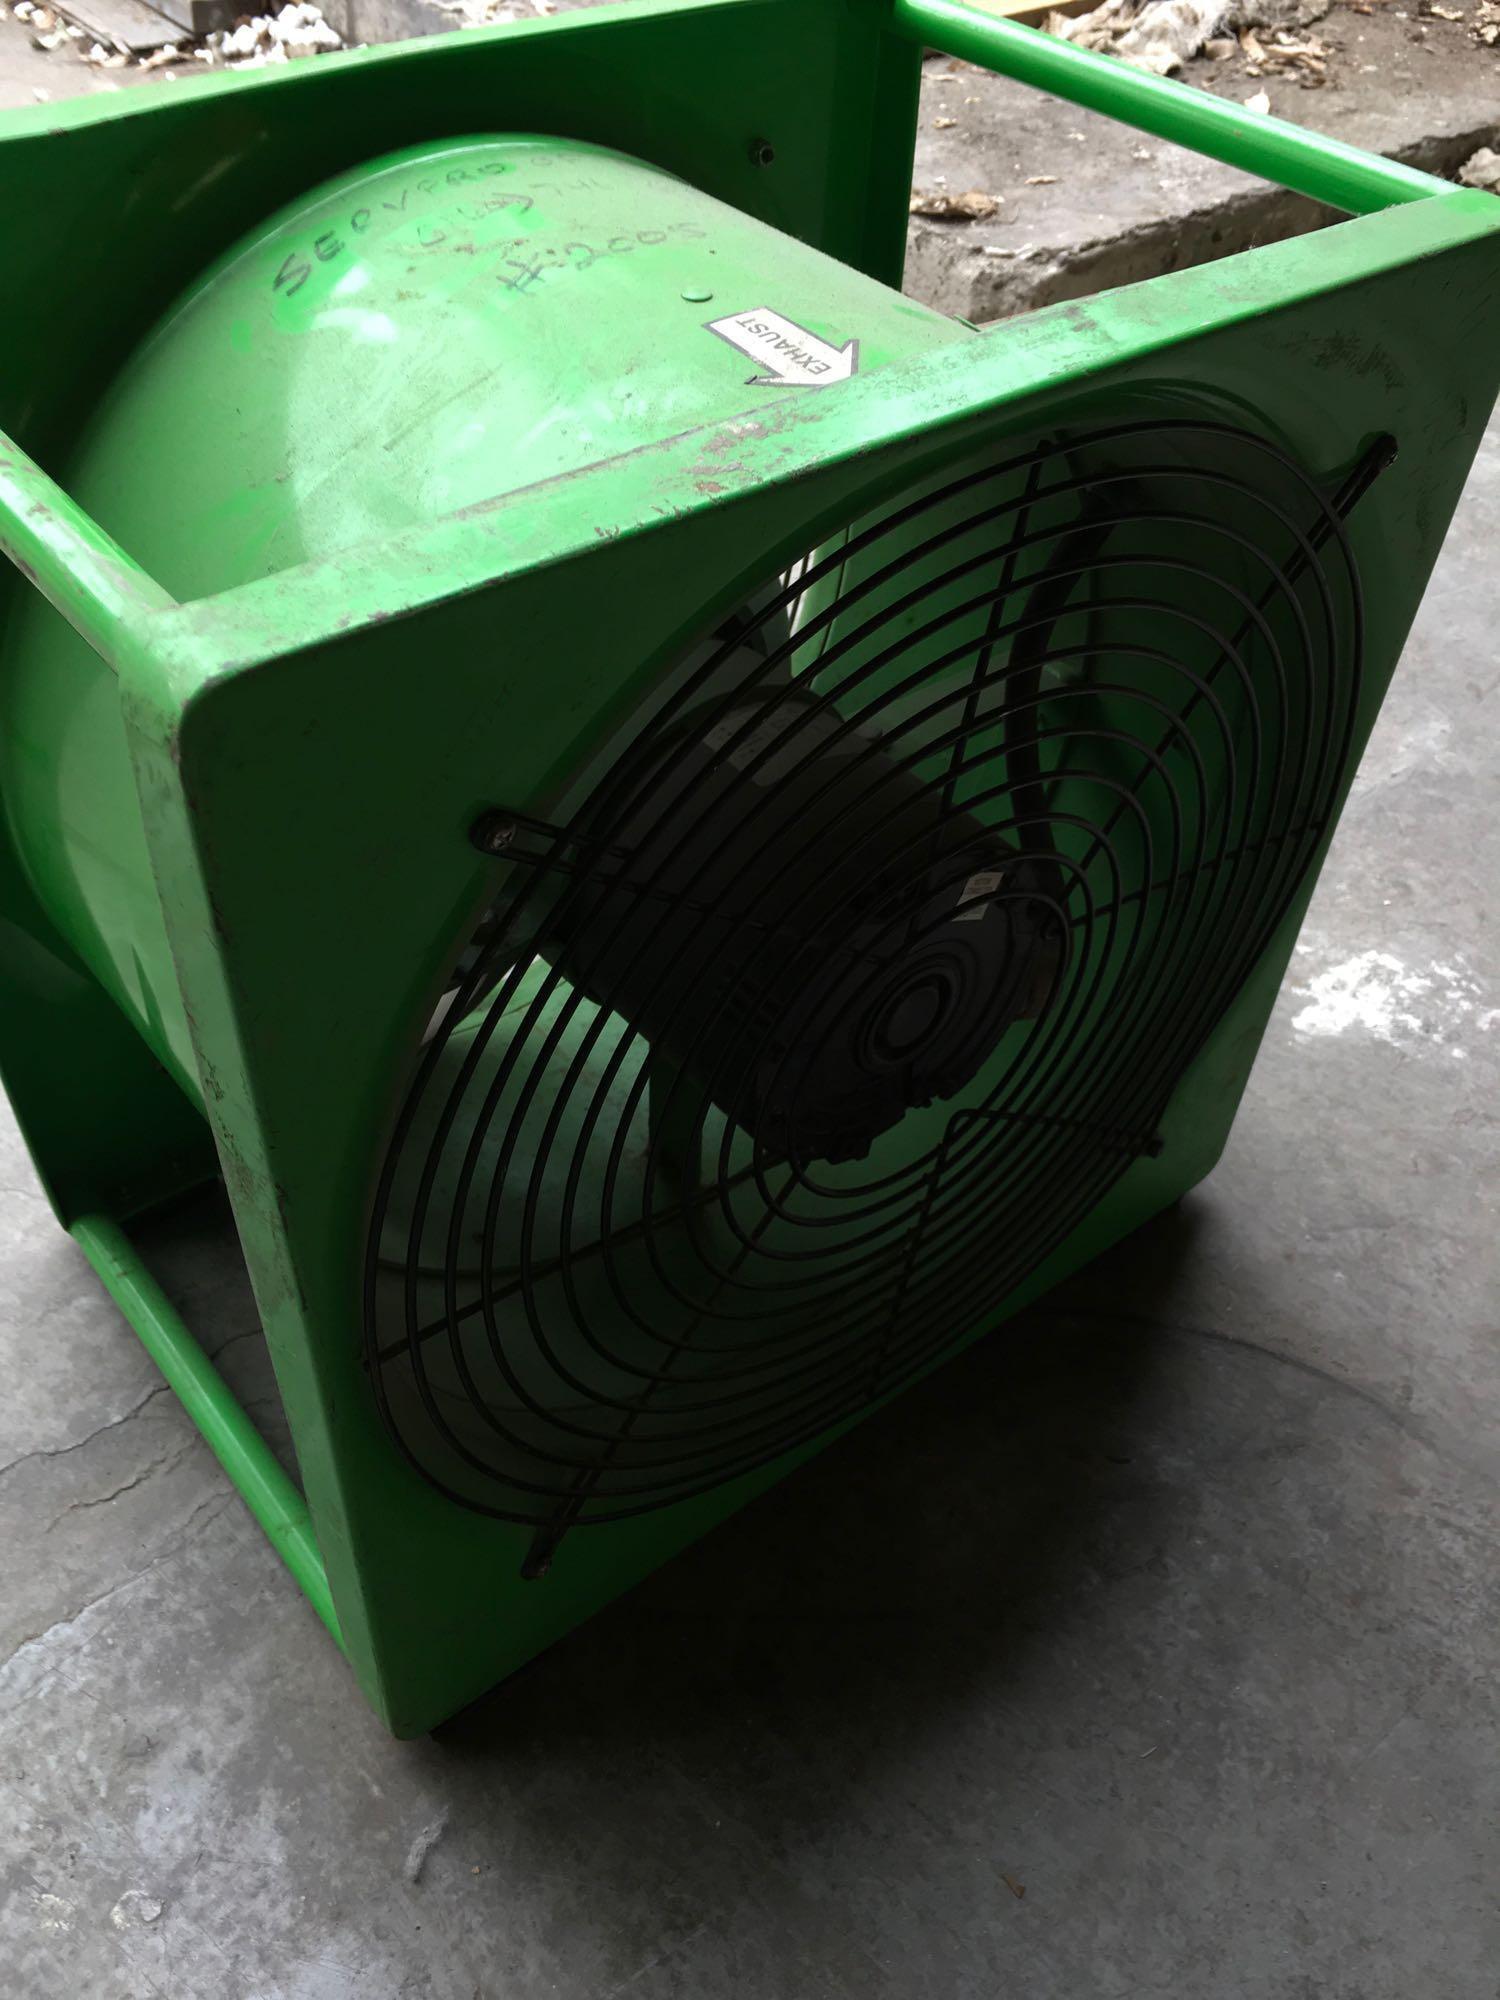 2 Servpro Fans model P-164- S. 5.4 AMPS. 1 has no tag to verify model